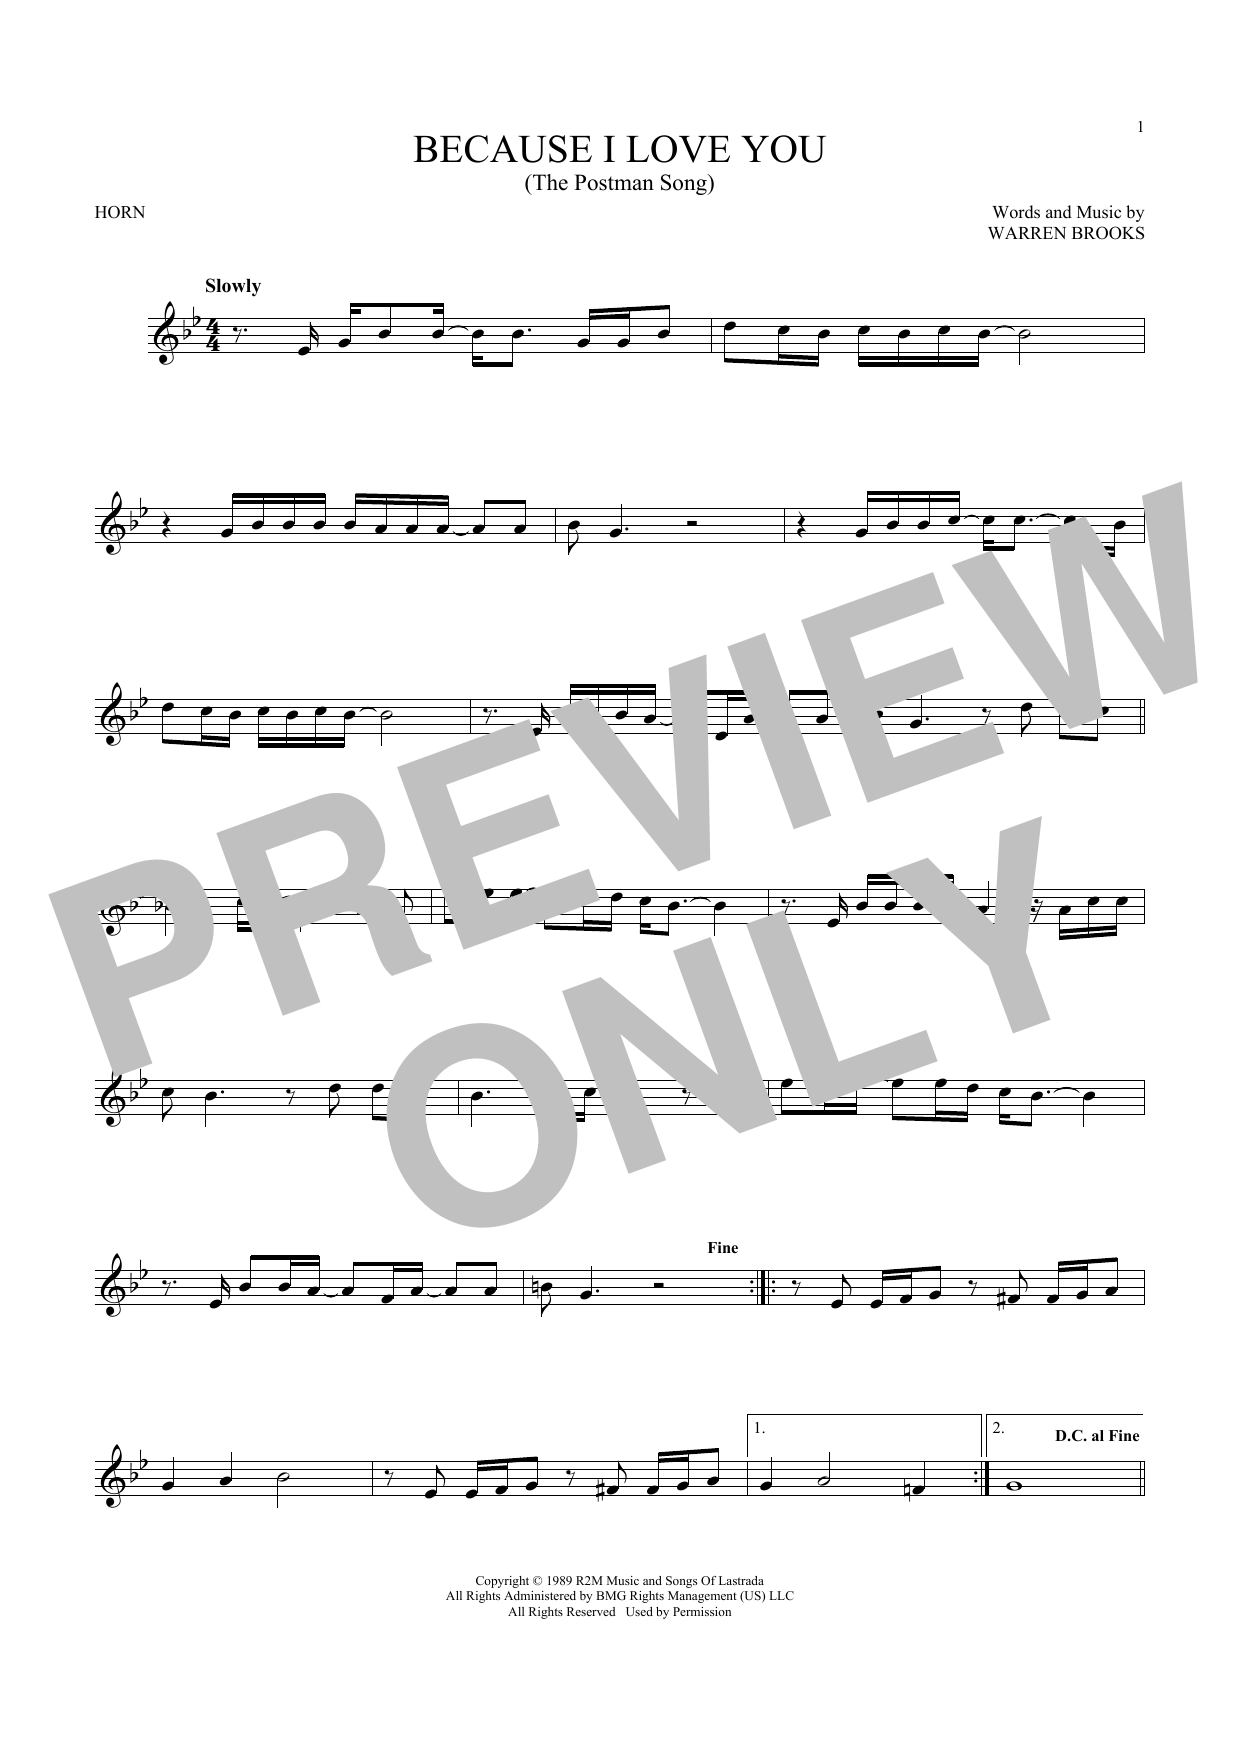 Download Stevie B Because I Love You (The Postman Song) Sheet Music